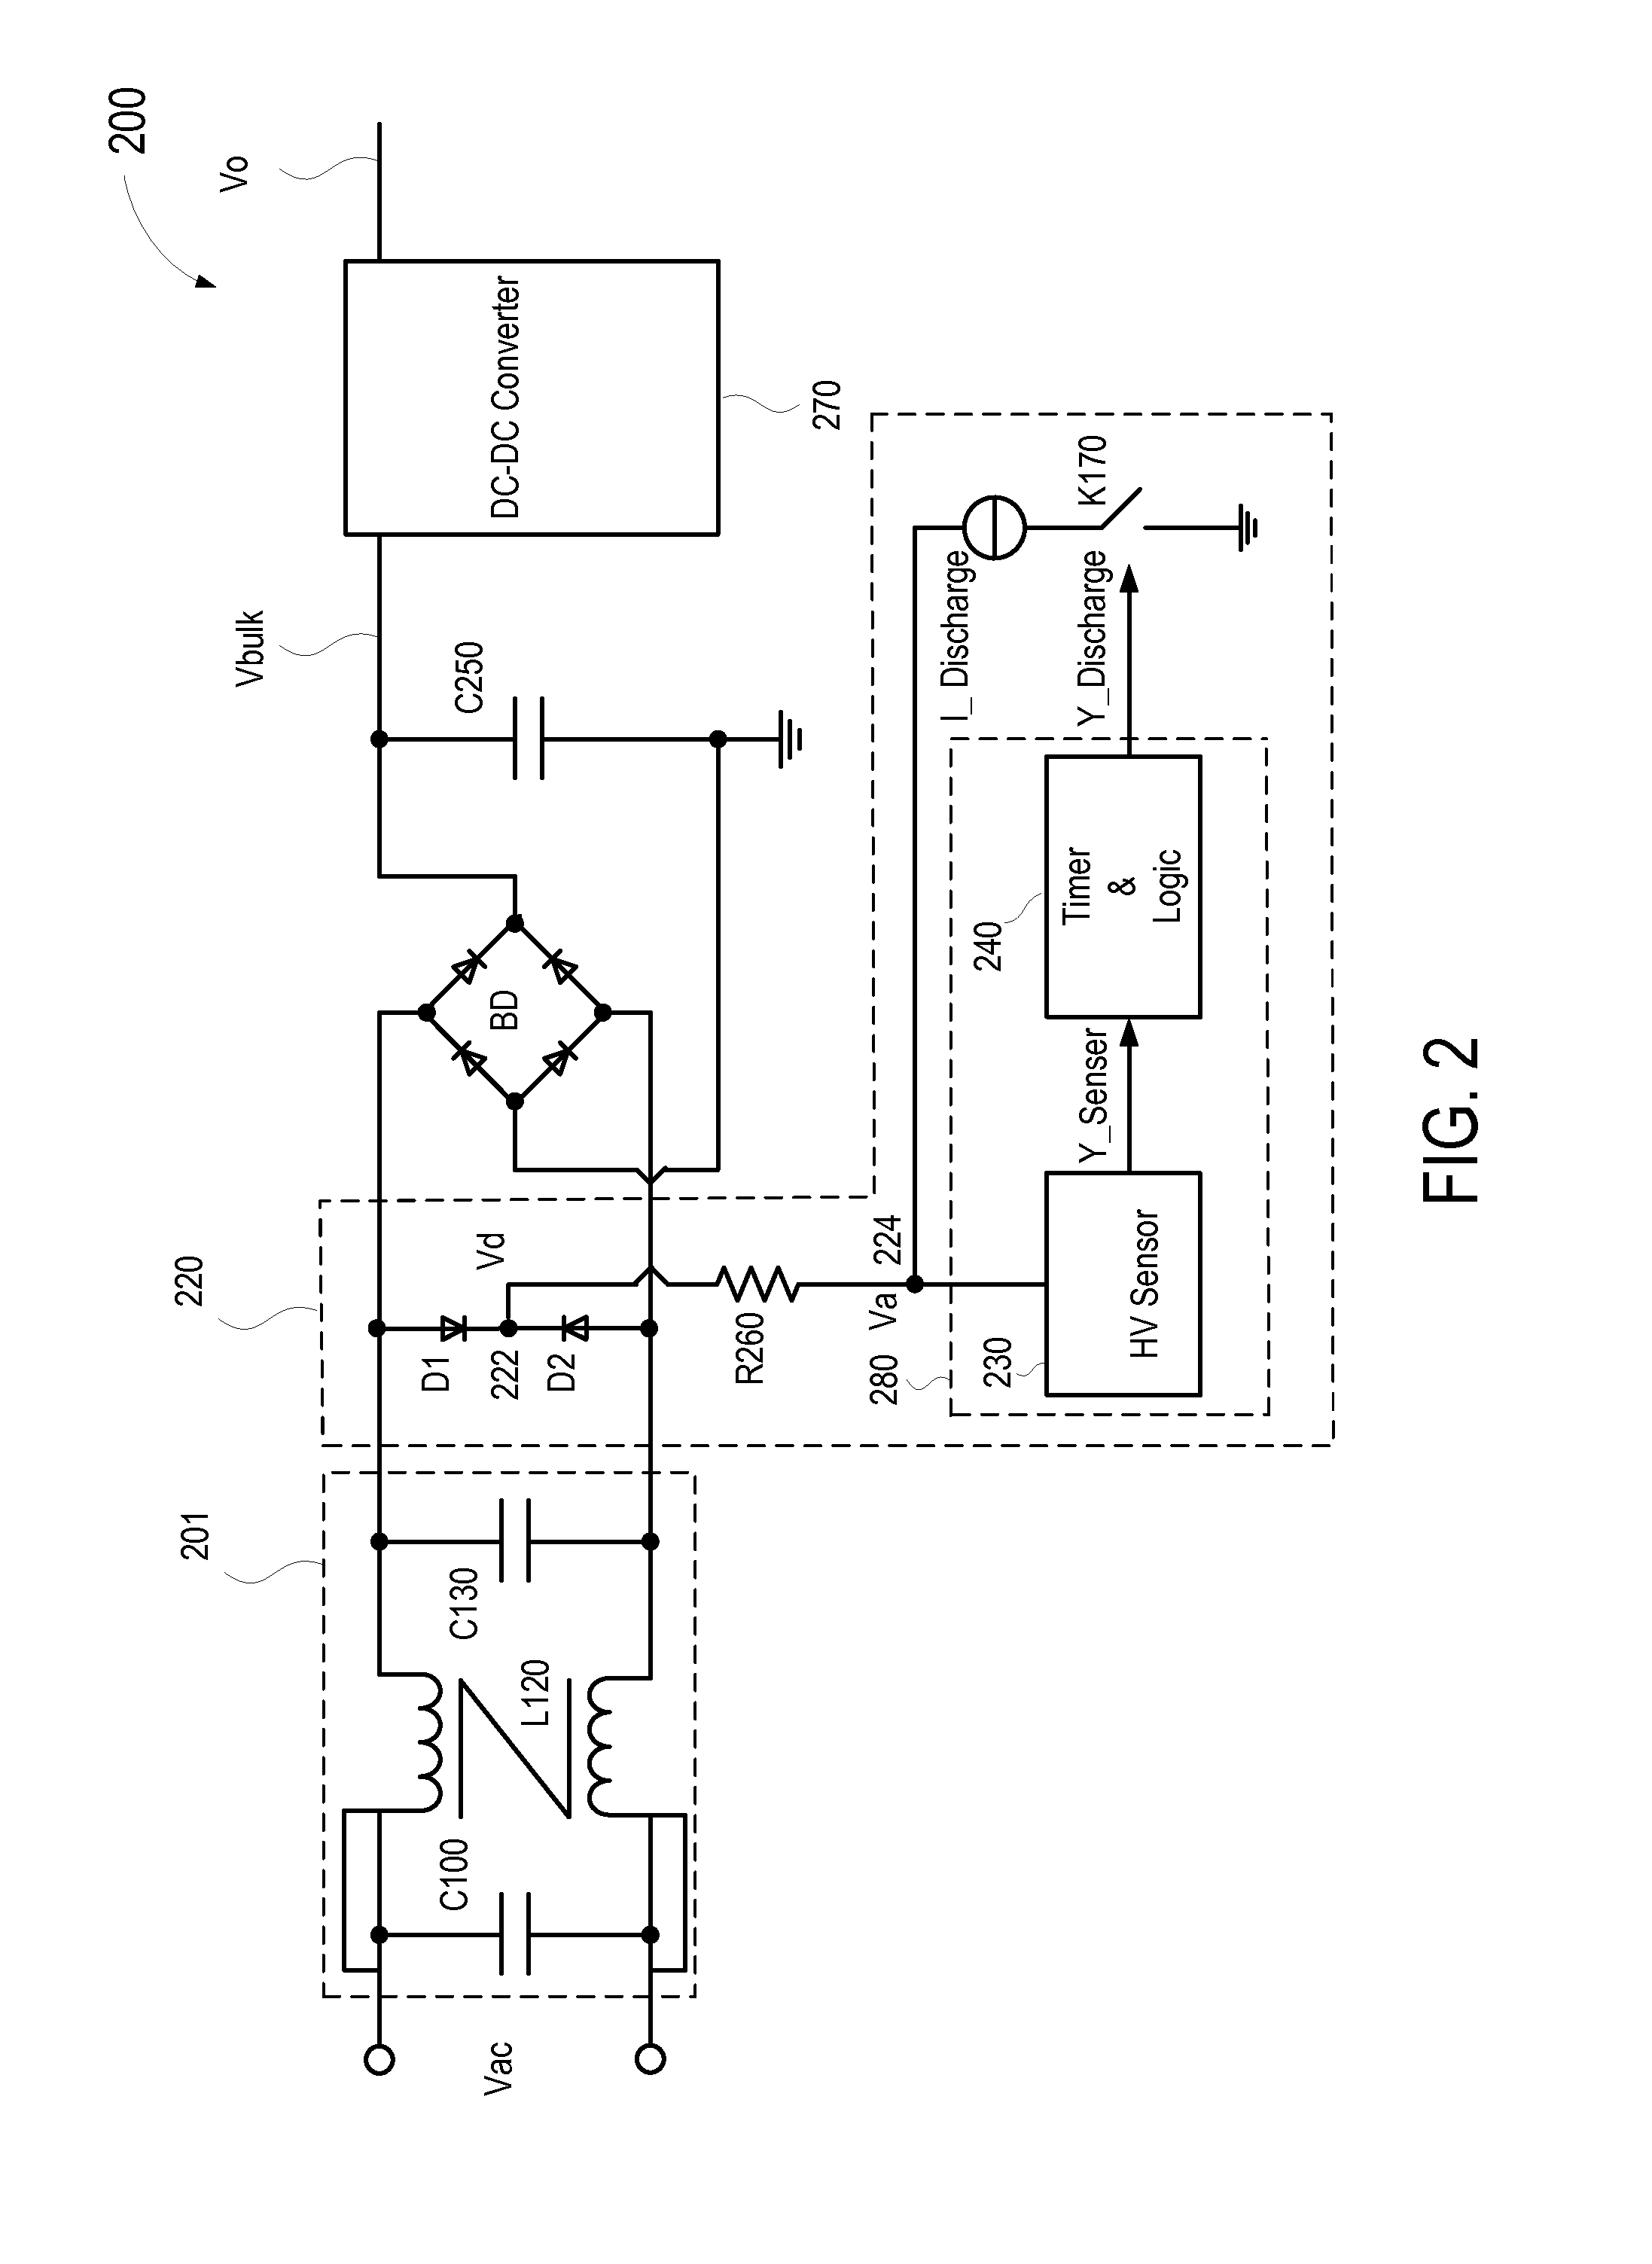 Capacitor discharge circuit for power supply EMI filters